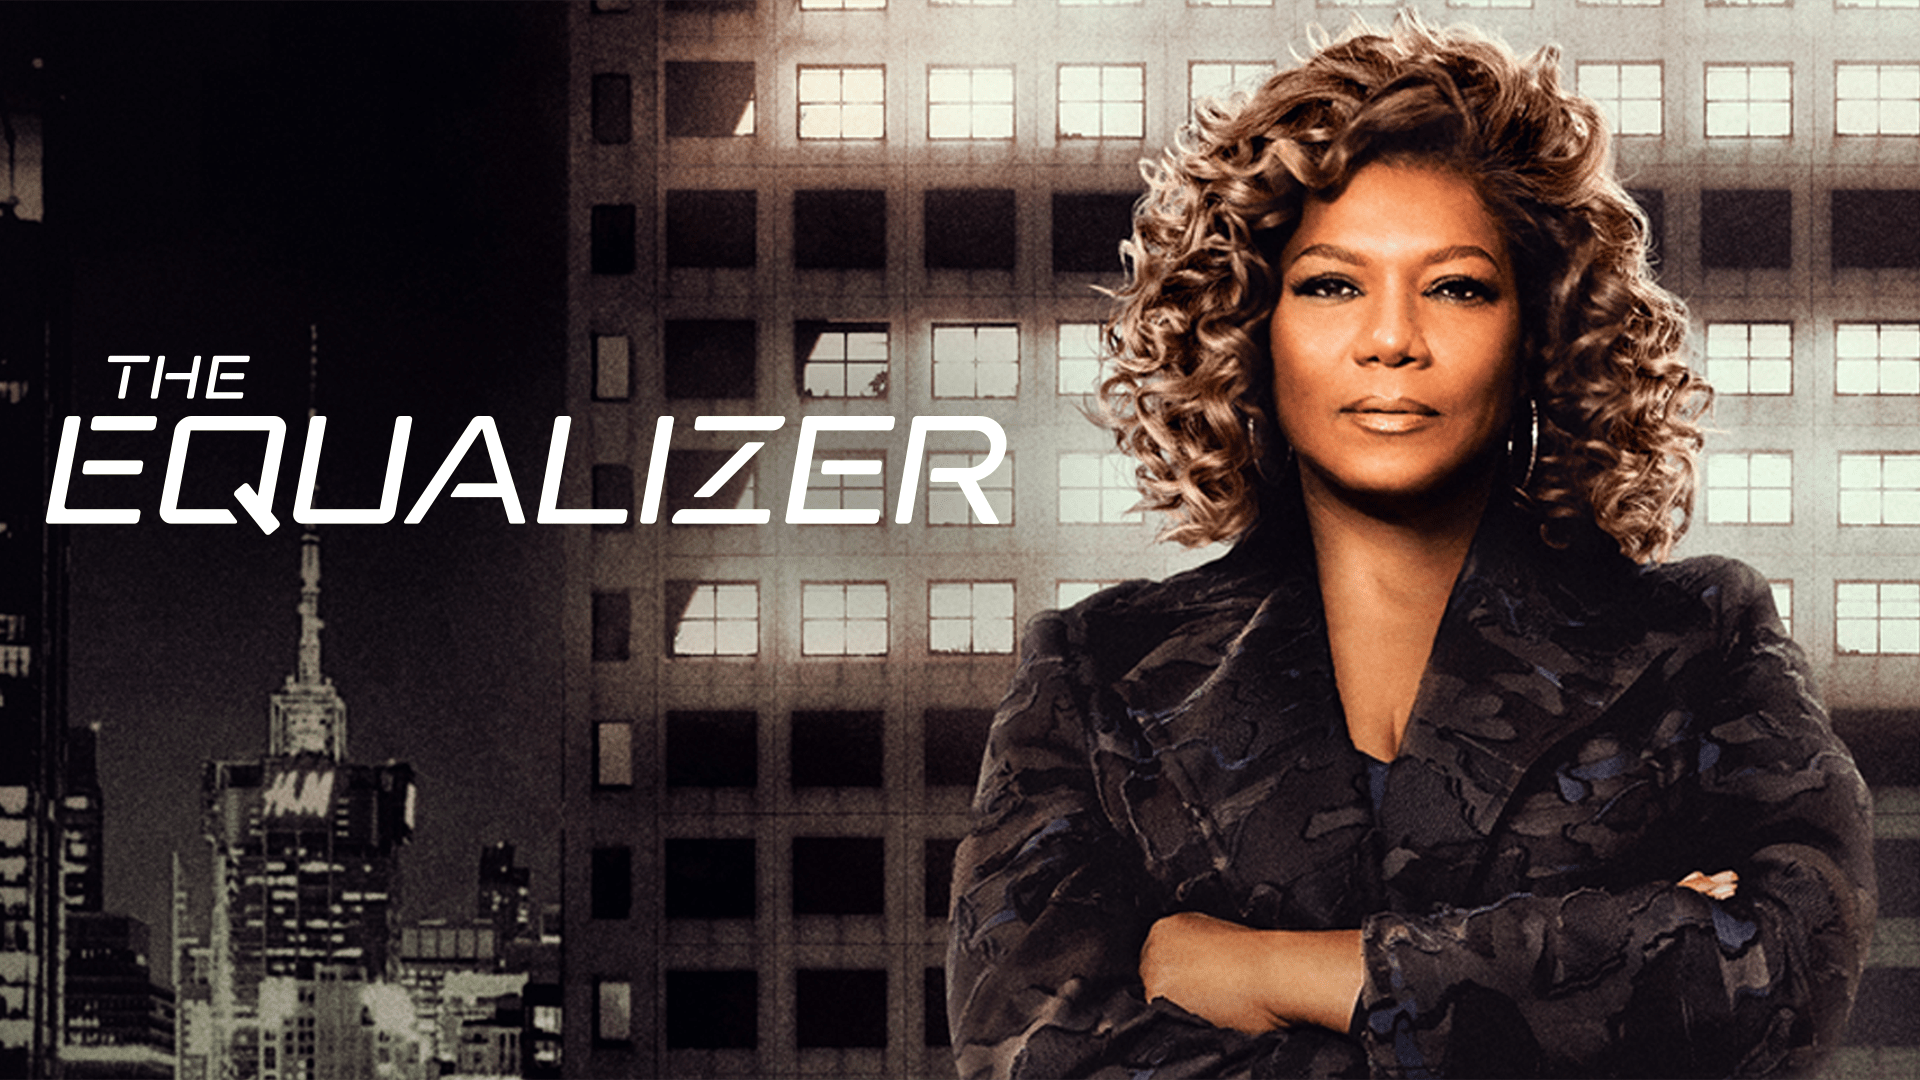 Watch The Equalizer Online - Stream Full Episodes